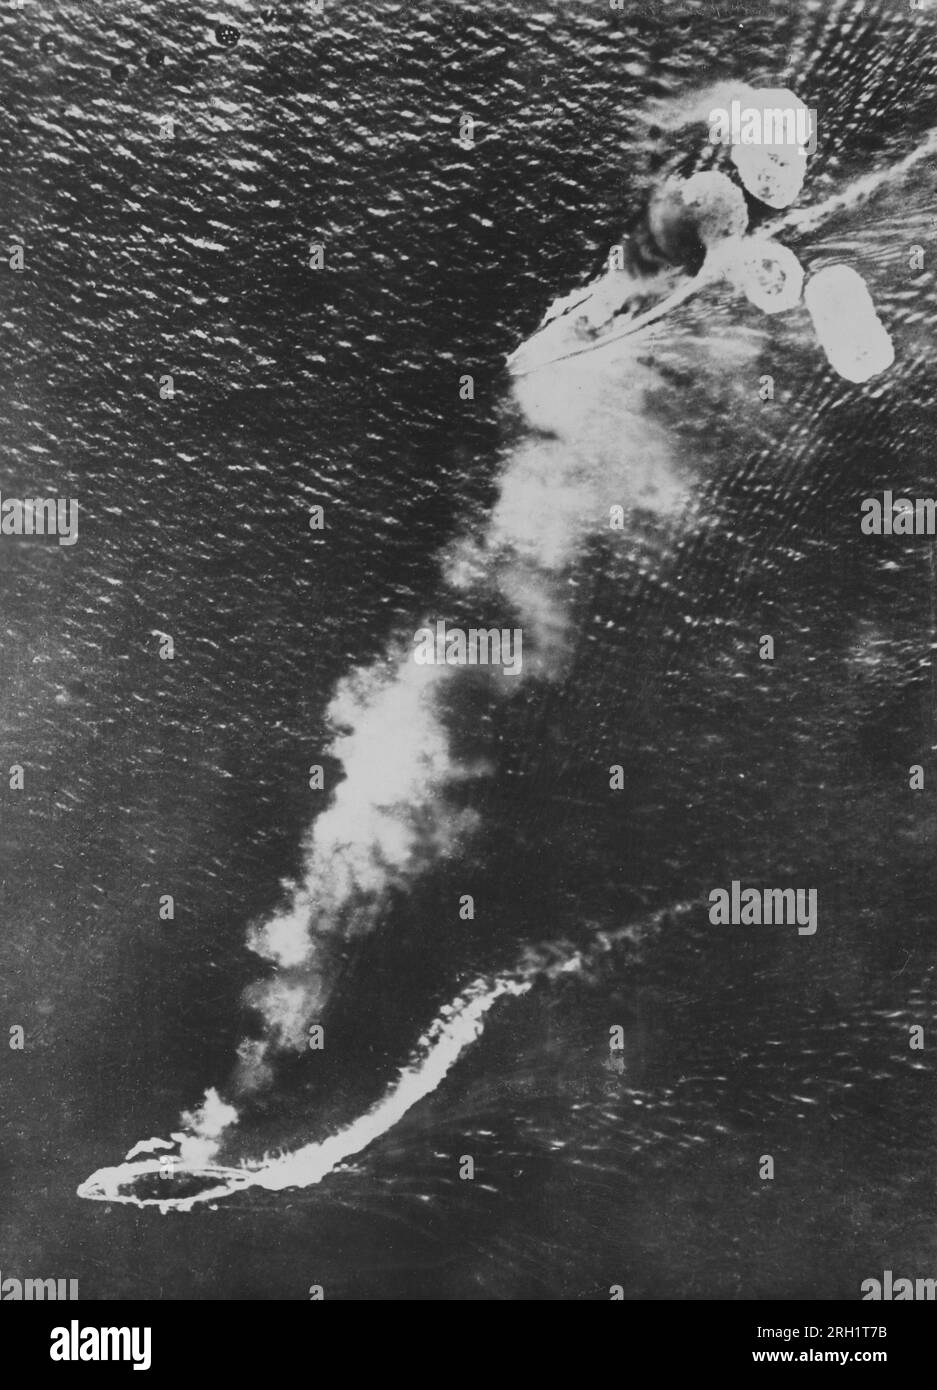 Malaya Campaign, December 1941 – February 1942. An aerial photo taken north of Malaya above the South China Sea shows the Royal Navy’s battleship HMS Prince of Wales (top) and battlecruiser HMS Repulse under attack by Imperial Japanese Navy aircraft, December 10, 1941. The two ships would succumb to the Japanese attacks later in the day, resulting in a devastating loss of Allied naval assets in the Pacific. Stock Photo